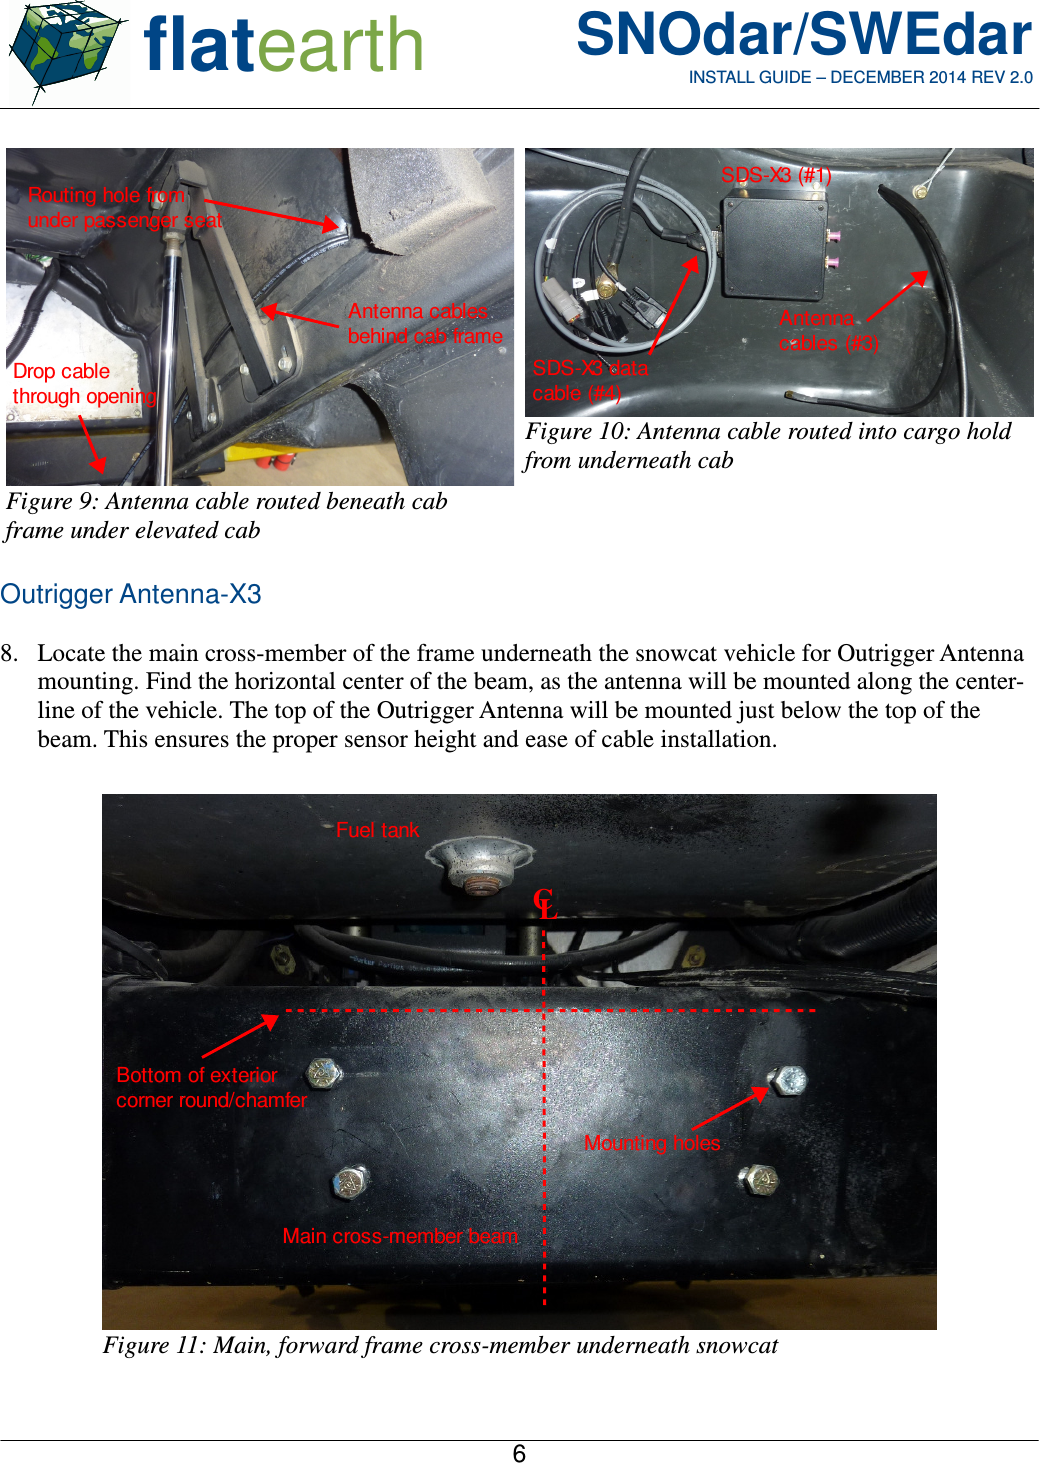  flatearth SNOdar/SWEdarINSTALL GUIDE – DECEMBER 2014 REV 2.0Outrigger Antenna-X38. Locate the main cross-member of the frame underneath the snowcat vehicle for Outrigger Antennamounting. Find the horizontal center of the beam, as the antenna will be mounted along the center-line of the vehicle. The top of the Outrigger Antenna will be mounted just below the top of thebeam. This ensures the proper sensor height and ease of cable installation.6Figure 11: Main, forward frame cross-member underneath snowcatCL Bottom of exterior corner round/chamfer Mounting holesMain cross-member beamFigure 9: Antenna cable routed beneath cabframe under elevated cabRouting hole from under passenger seat  Antenna cables behind cab frame  Drop cable through openingFigure 10: Antenna cable routed into cargo holdfrom underneath cabSDS-X3 data cable (#4) SDS-X3 (#1) Antenna cables (#3)Fuel tank